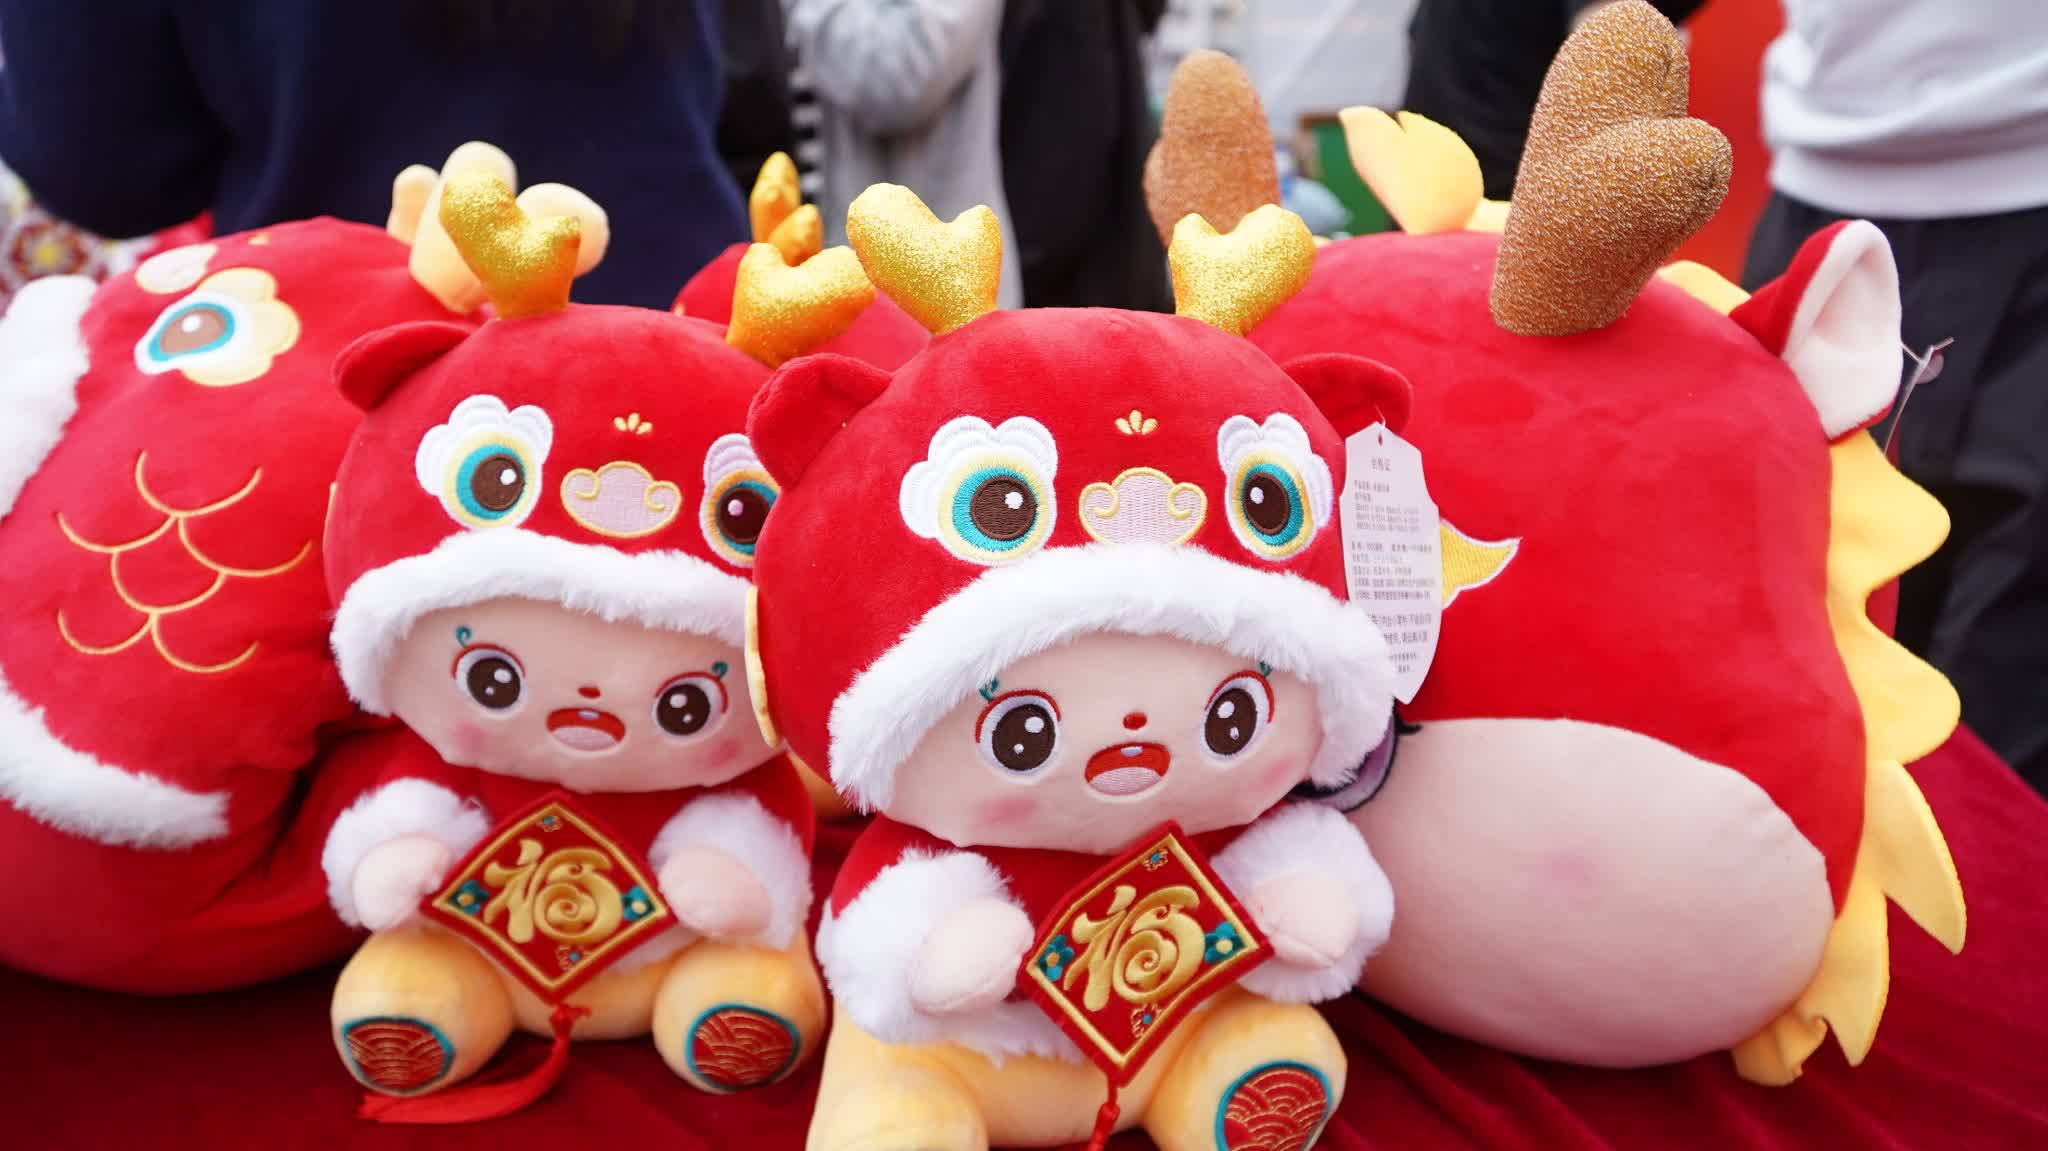 Do's and don'ts for Chinese New Year